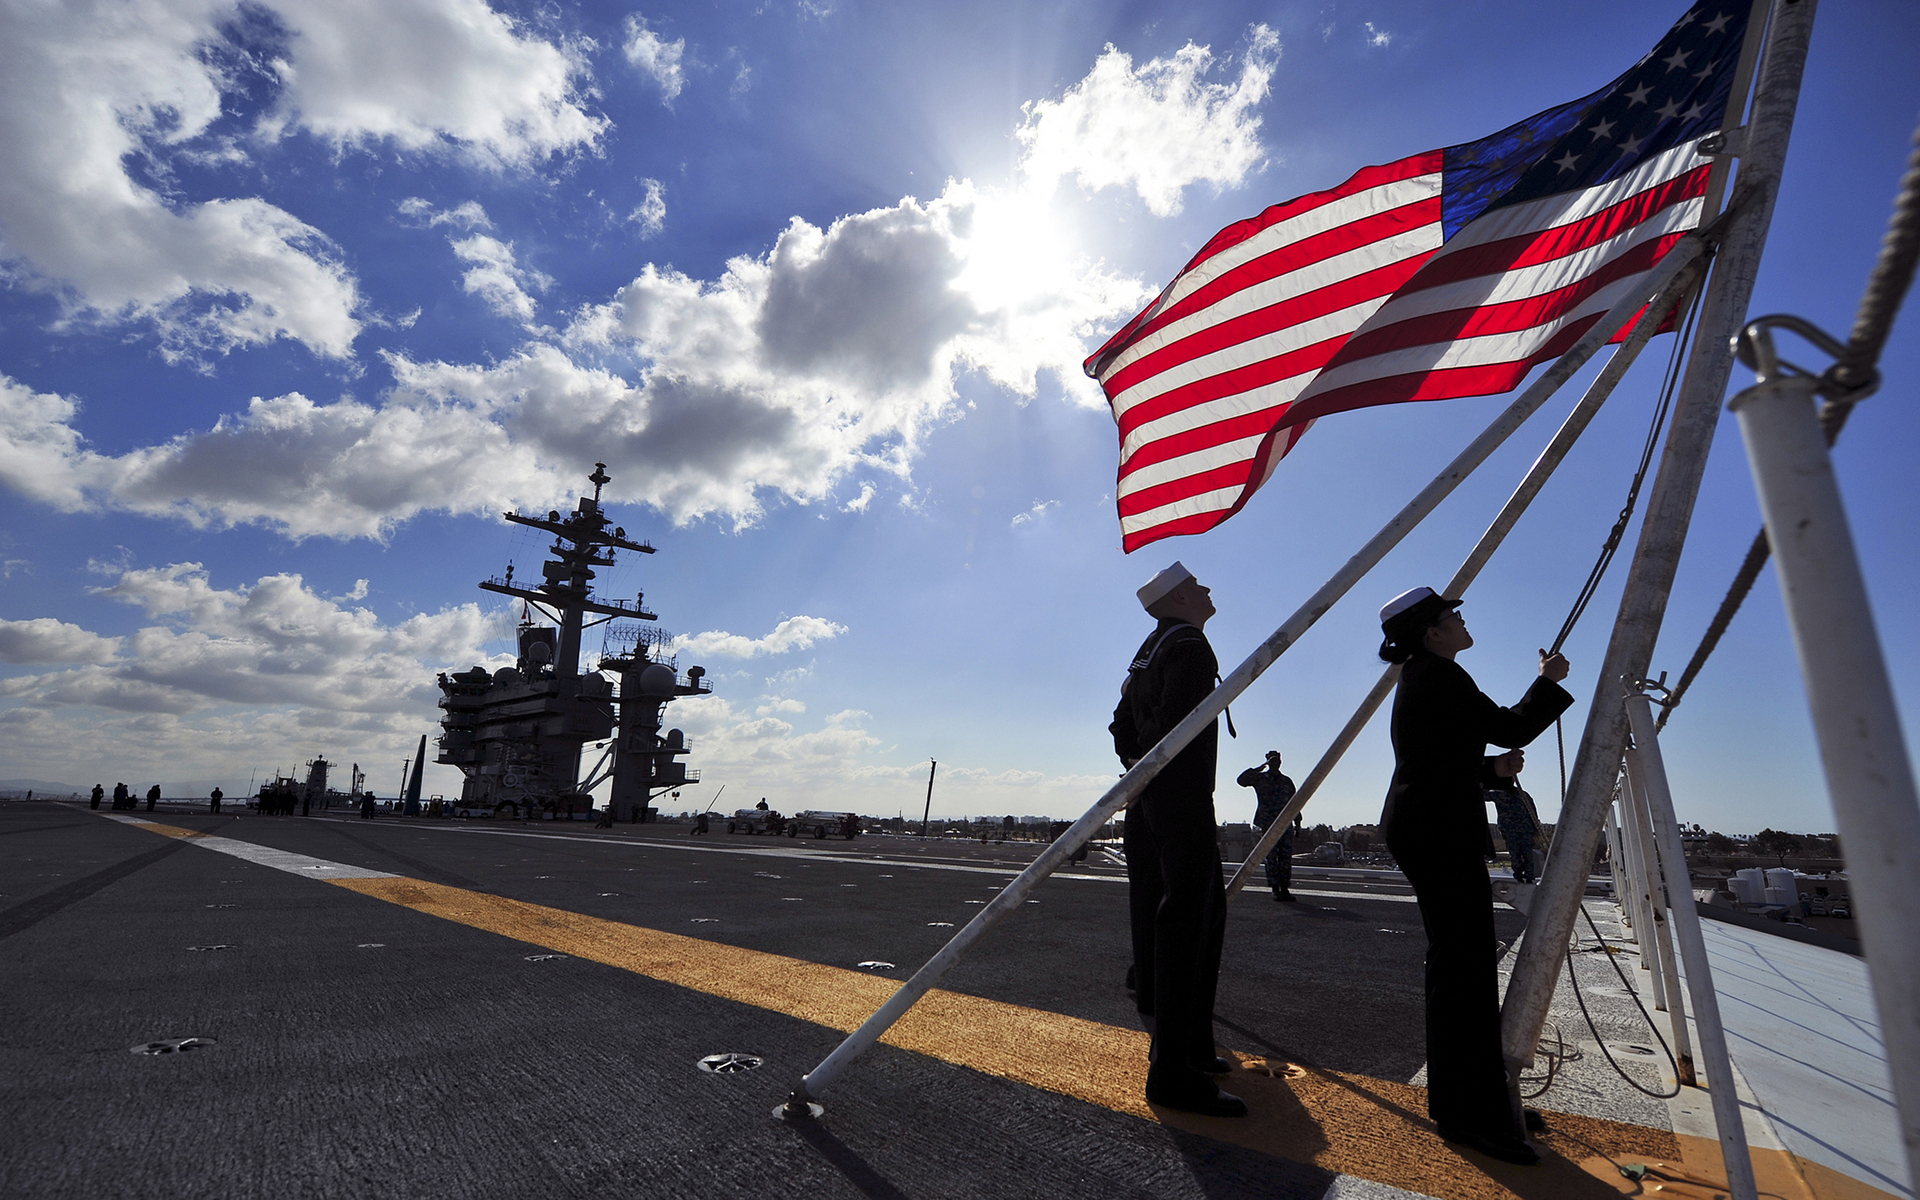 aircraft, Carrier, Sunlight, Clouds, Flag, American, Flag, Vehicles, Ships, Boats, Warriors, Soldiers, Navy, People, Men, Women, Males, Females, Sky, Clouds, Sunlight Wallpaper